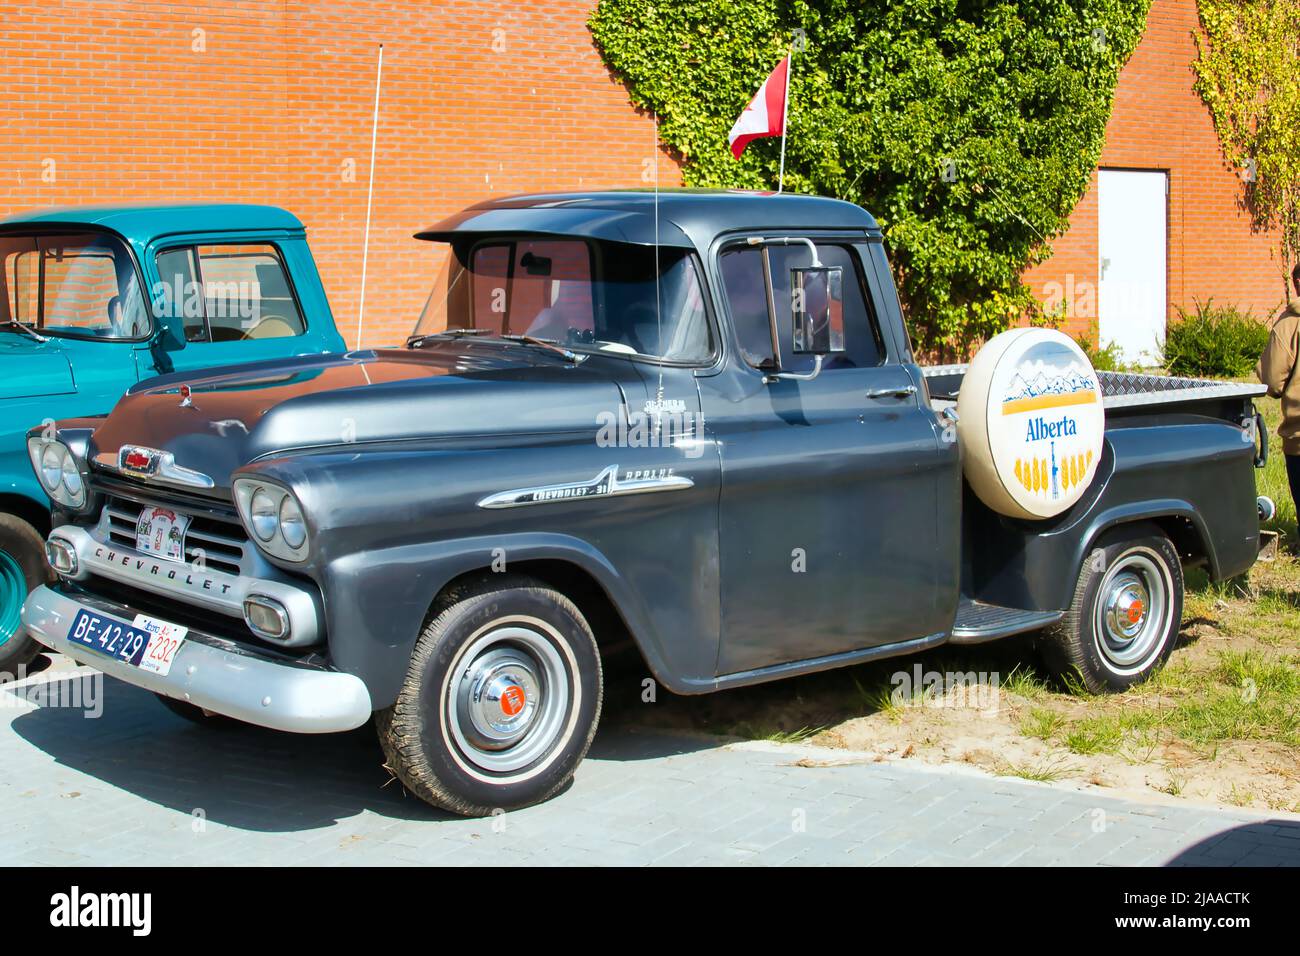 Beautifully restored vintage pick up truck Chevrolet Apache from the 1950’s at a classic car show in Uithuizen, Groningen, the Netherlands Stock Photo